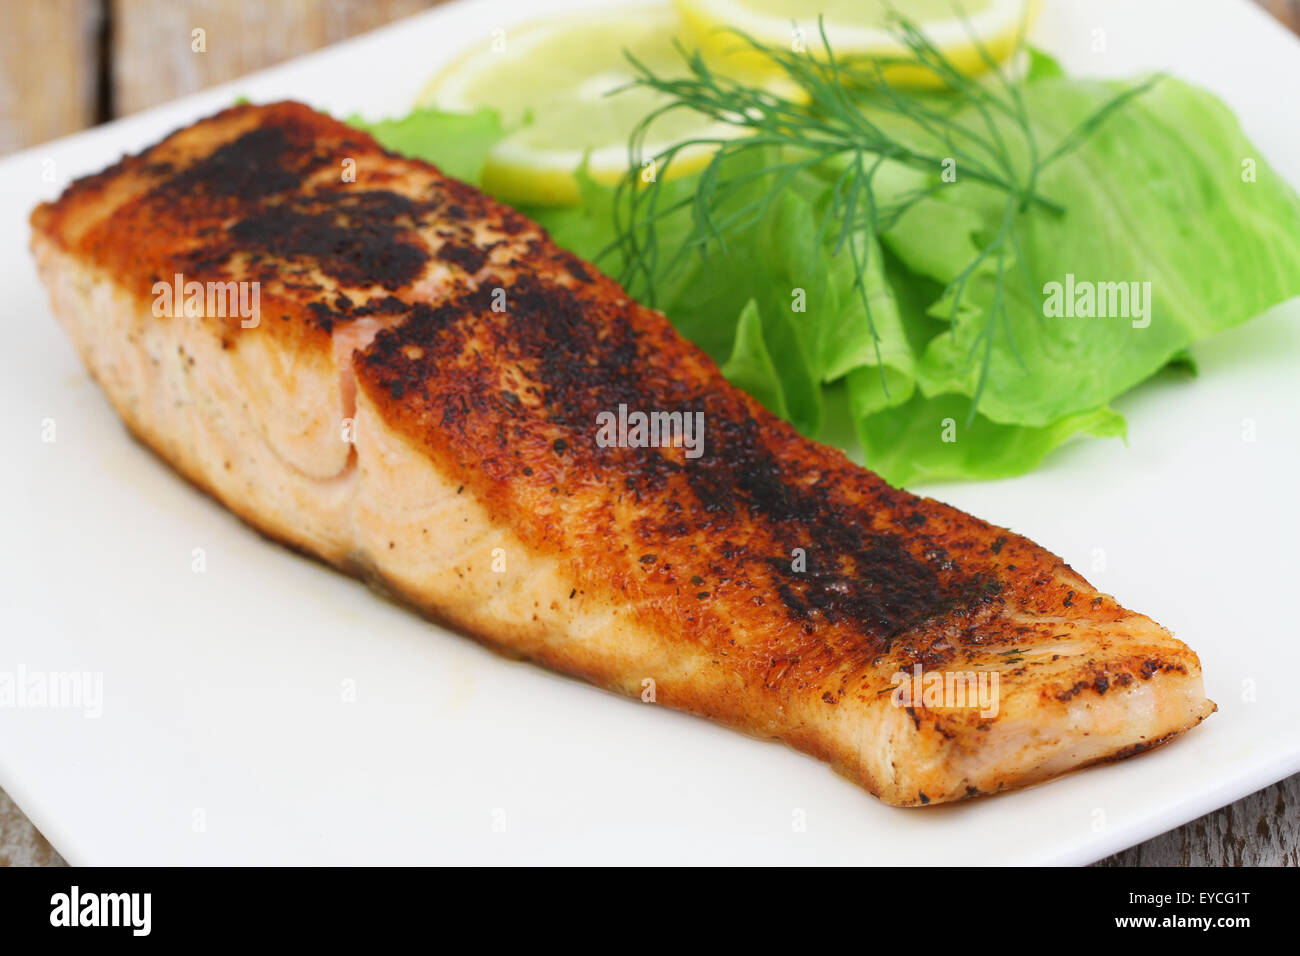 Grilled salmon with side salad, closeup Stock Photo